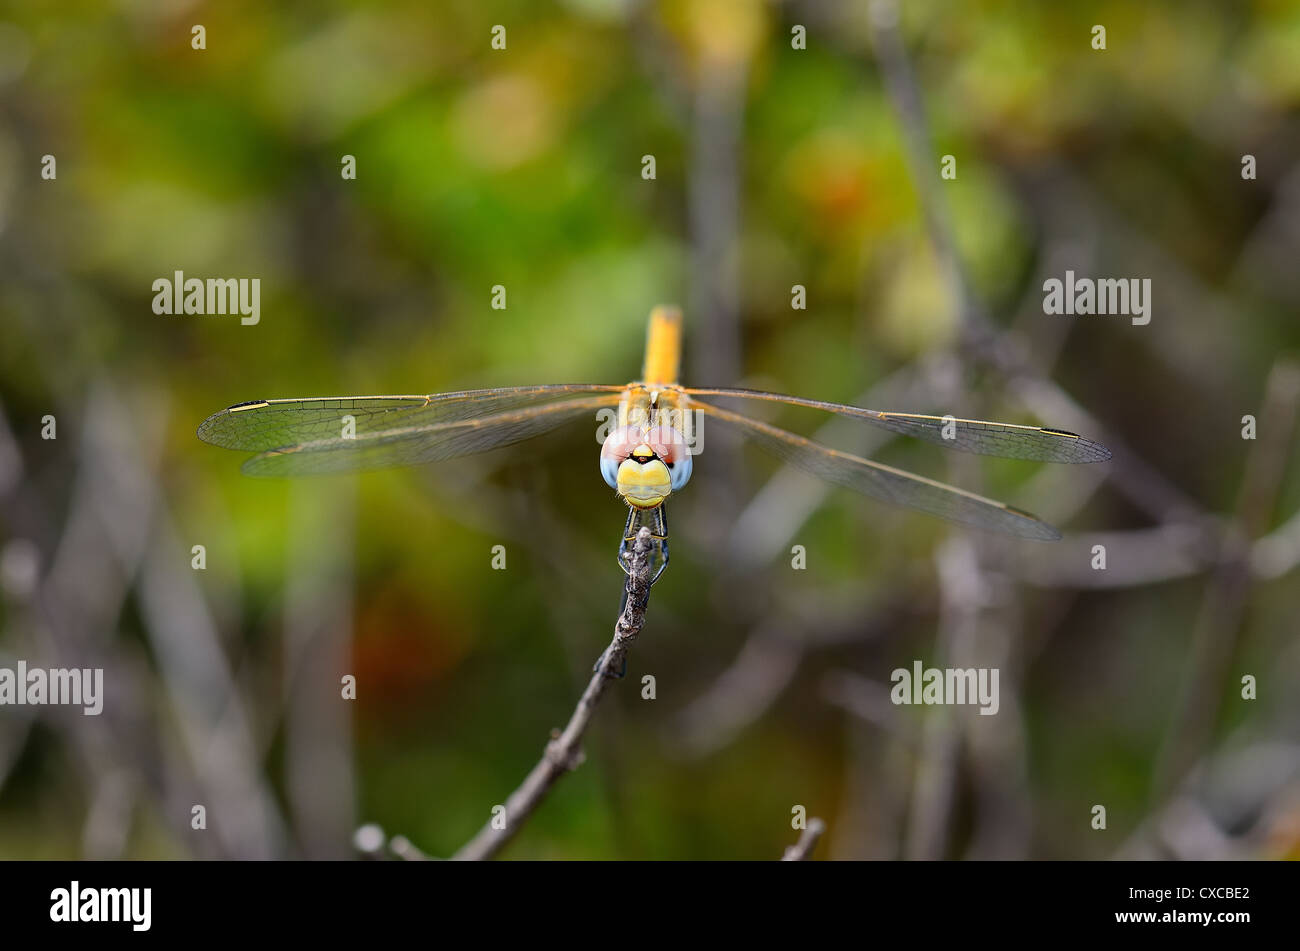 dragonfly in are natural environment Stock Photo